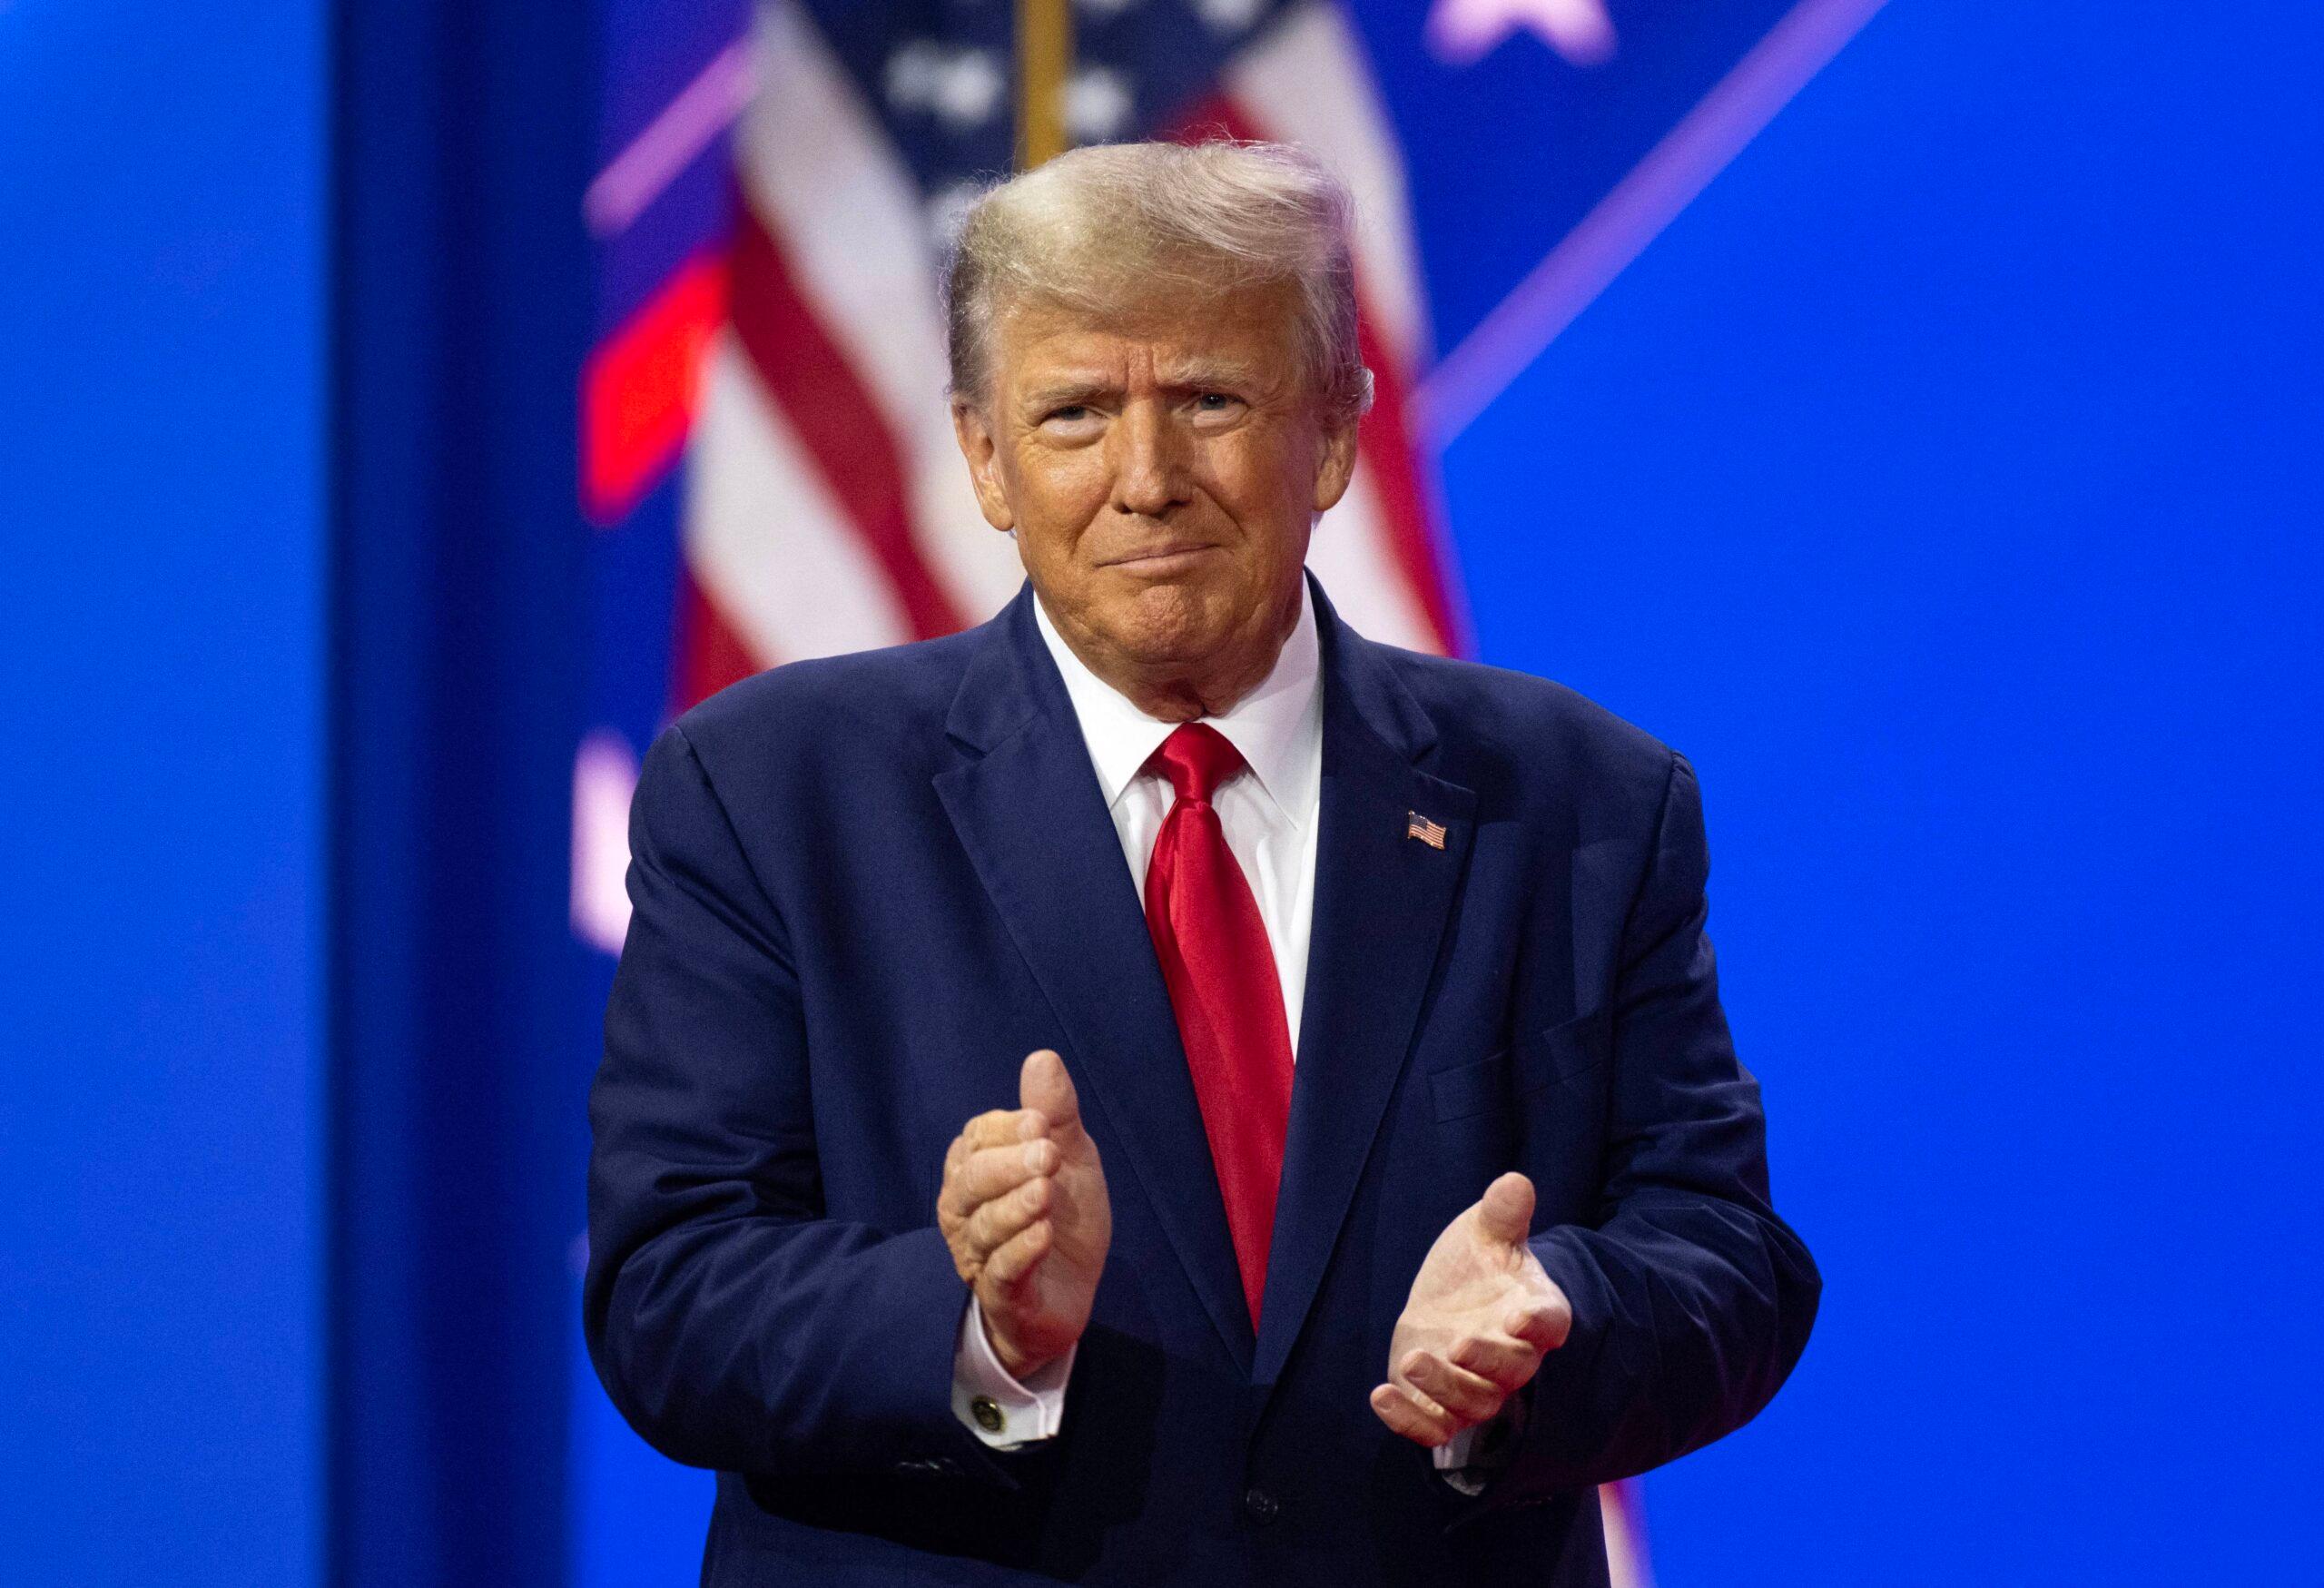 Donald Trump clapping at CPAC 2023